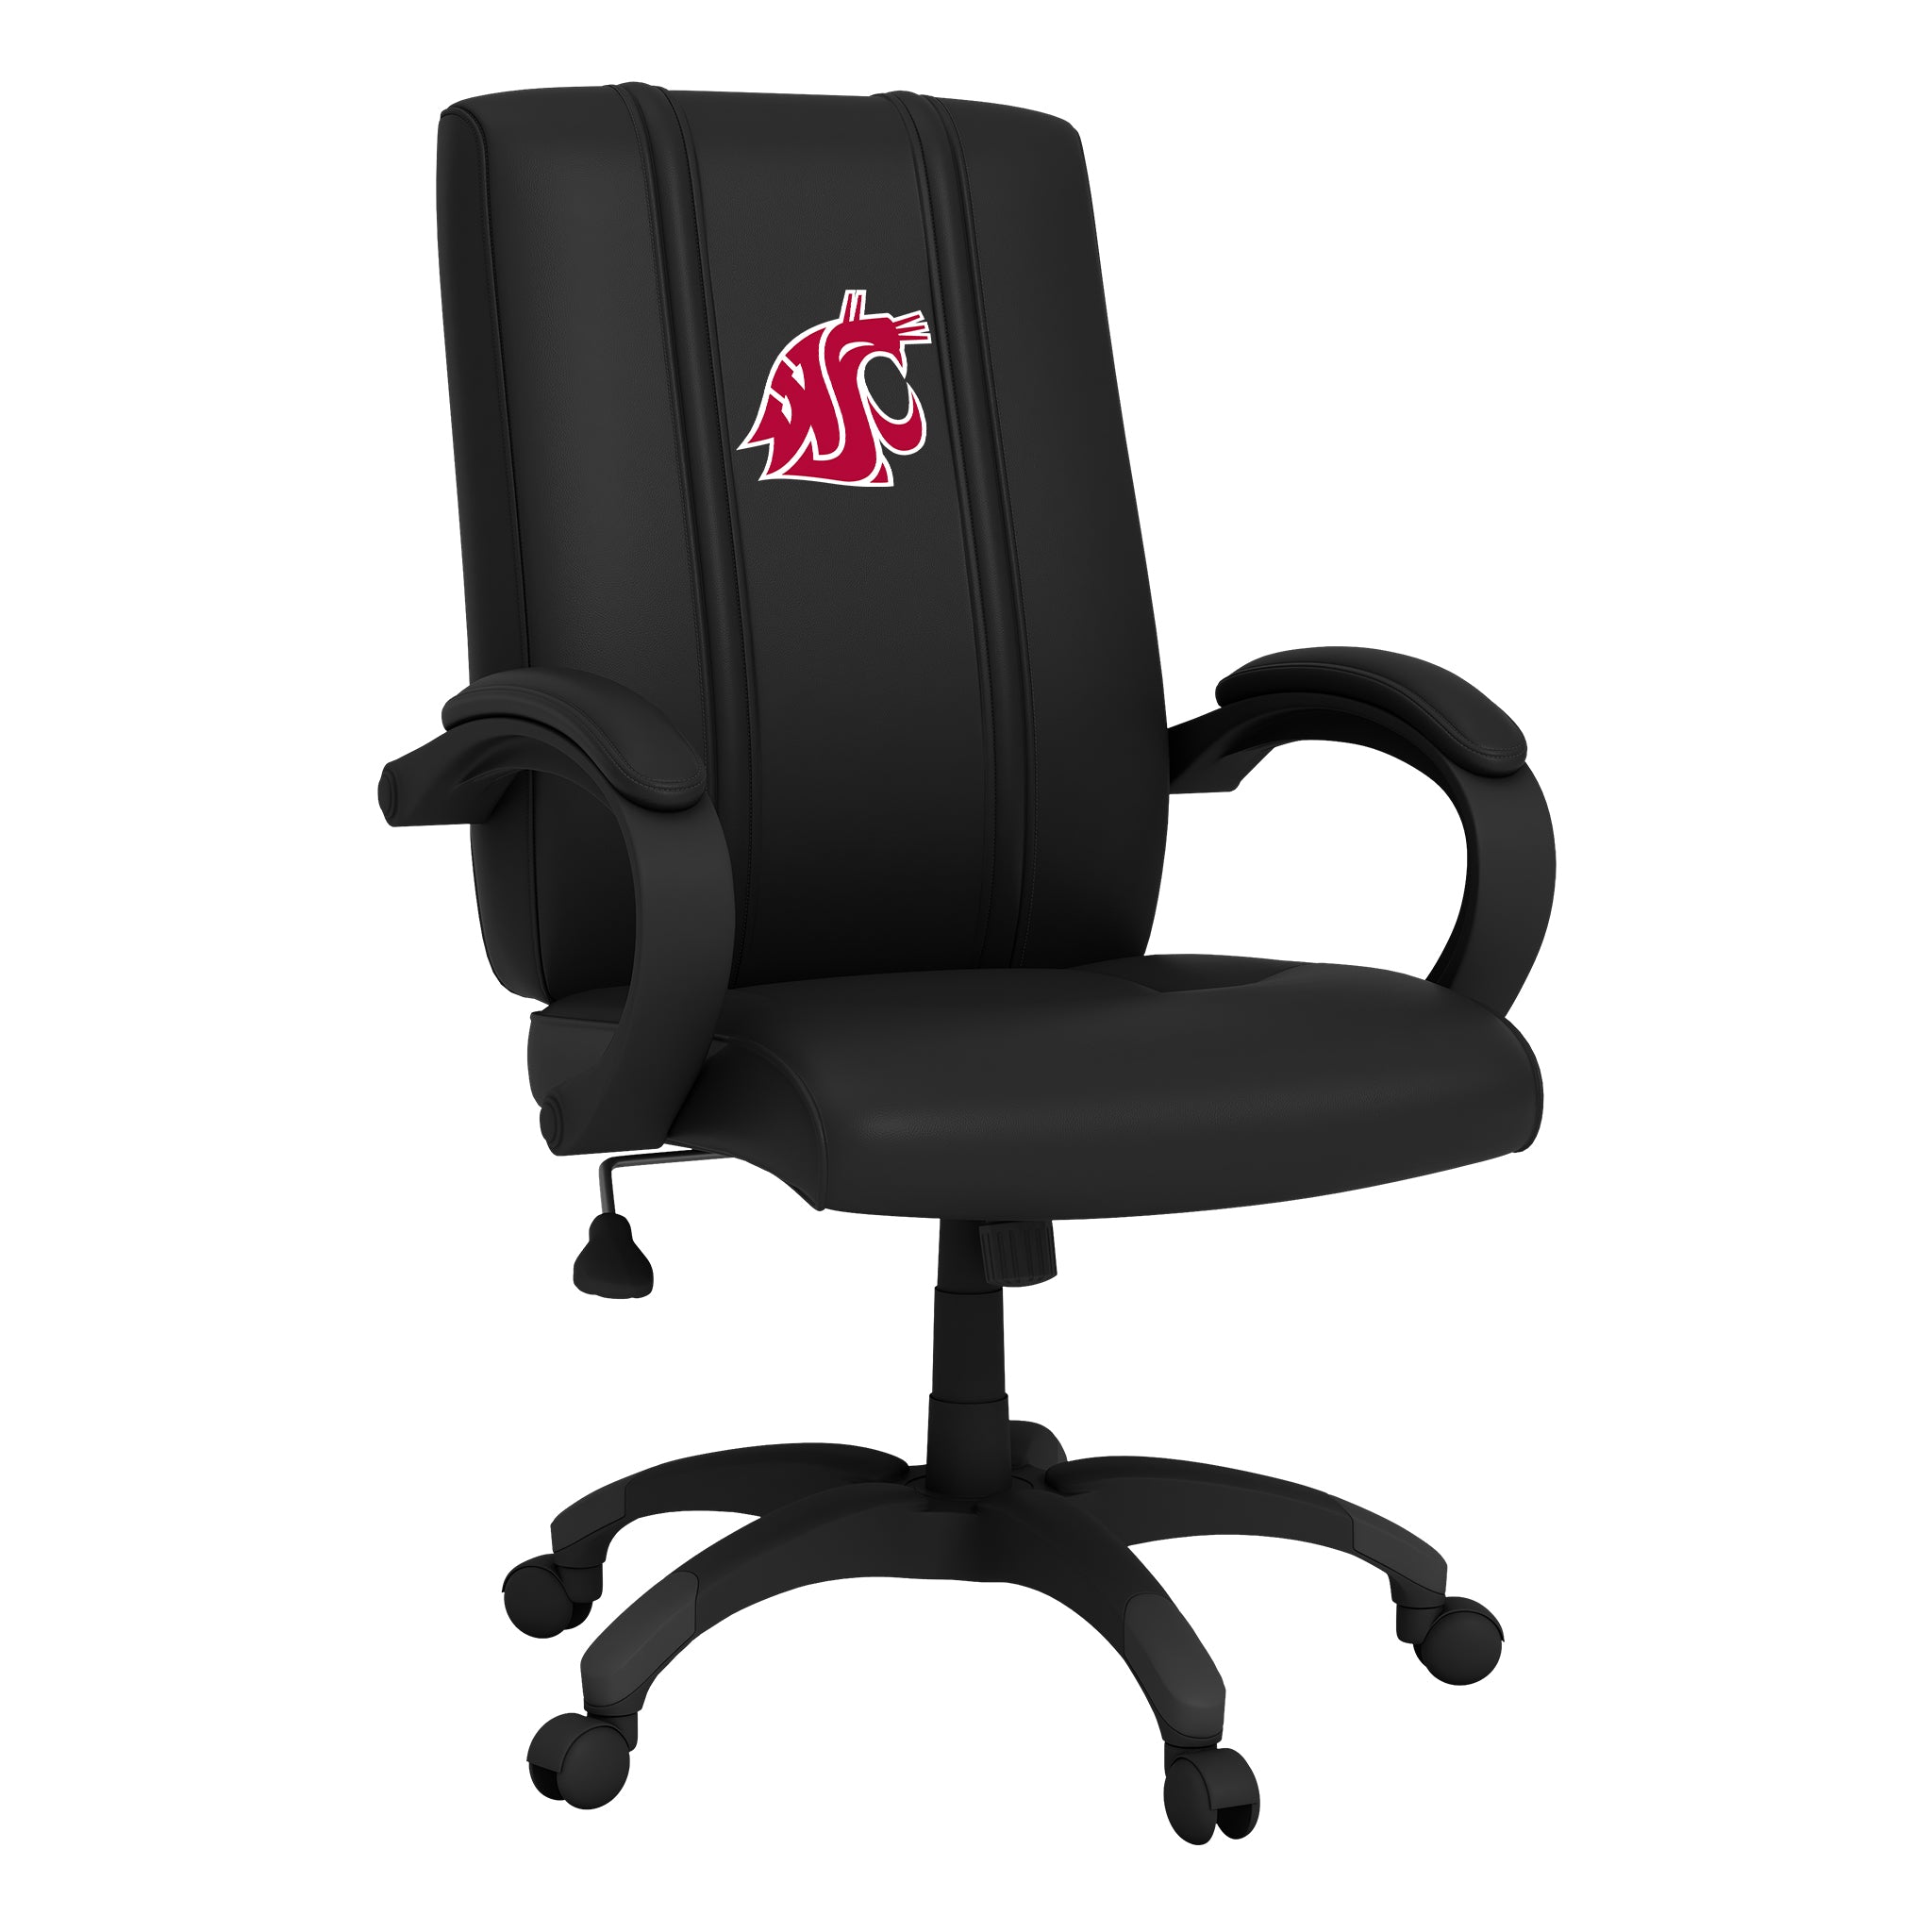 Washington State Cougars Office Chair 1000 with Washington State Cougars Logo